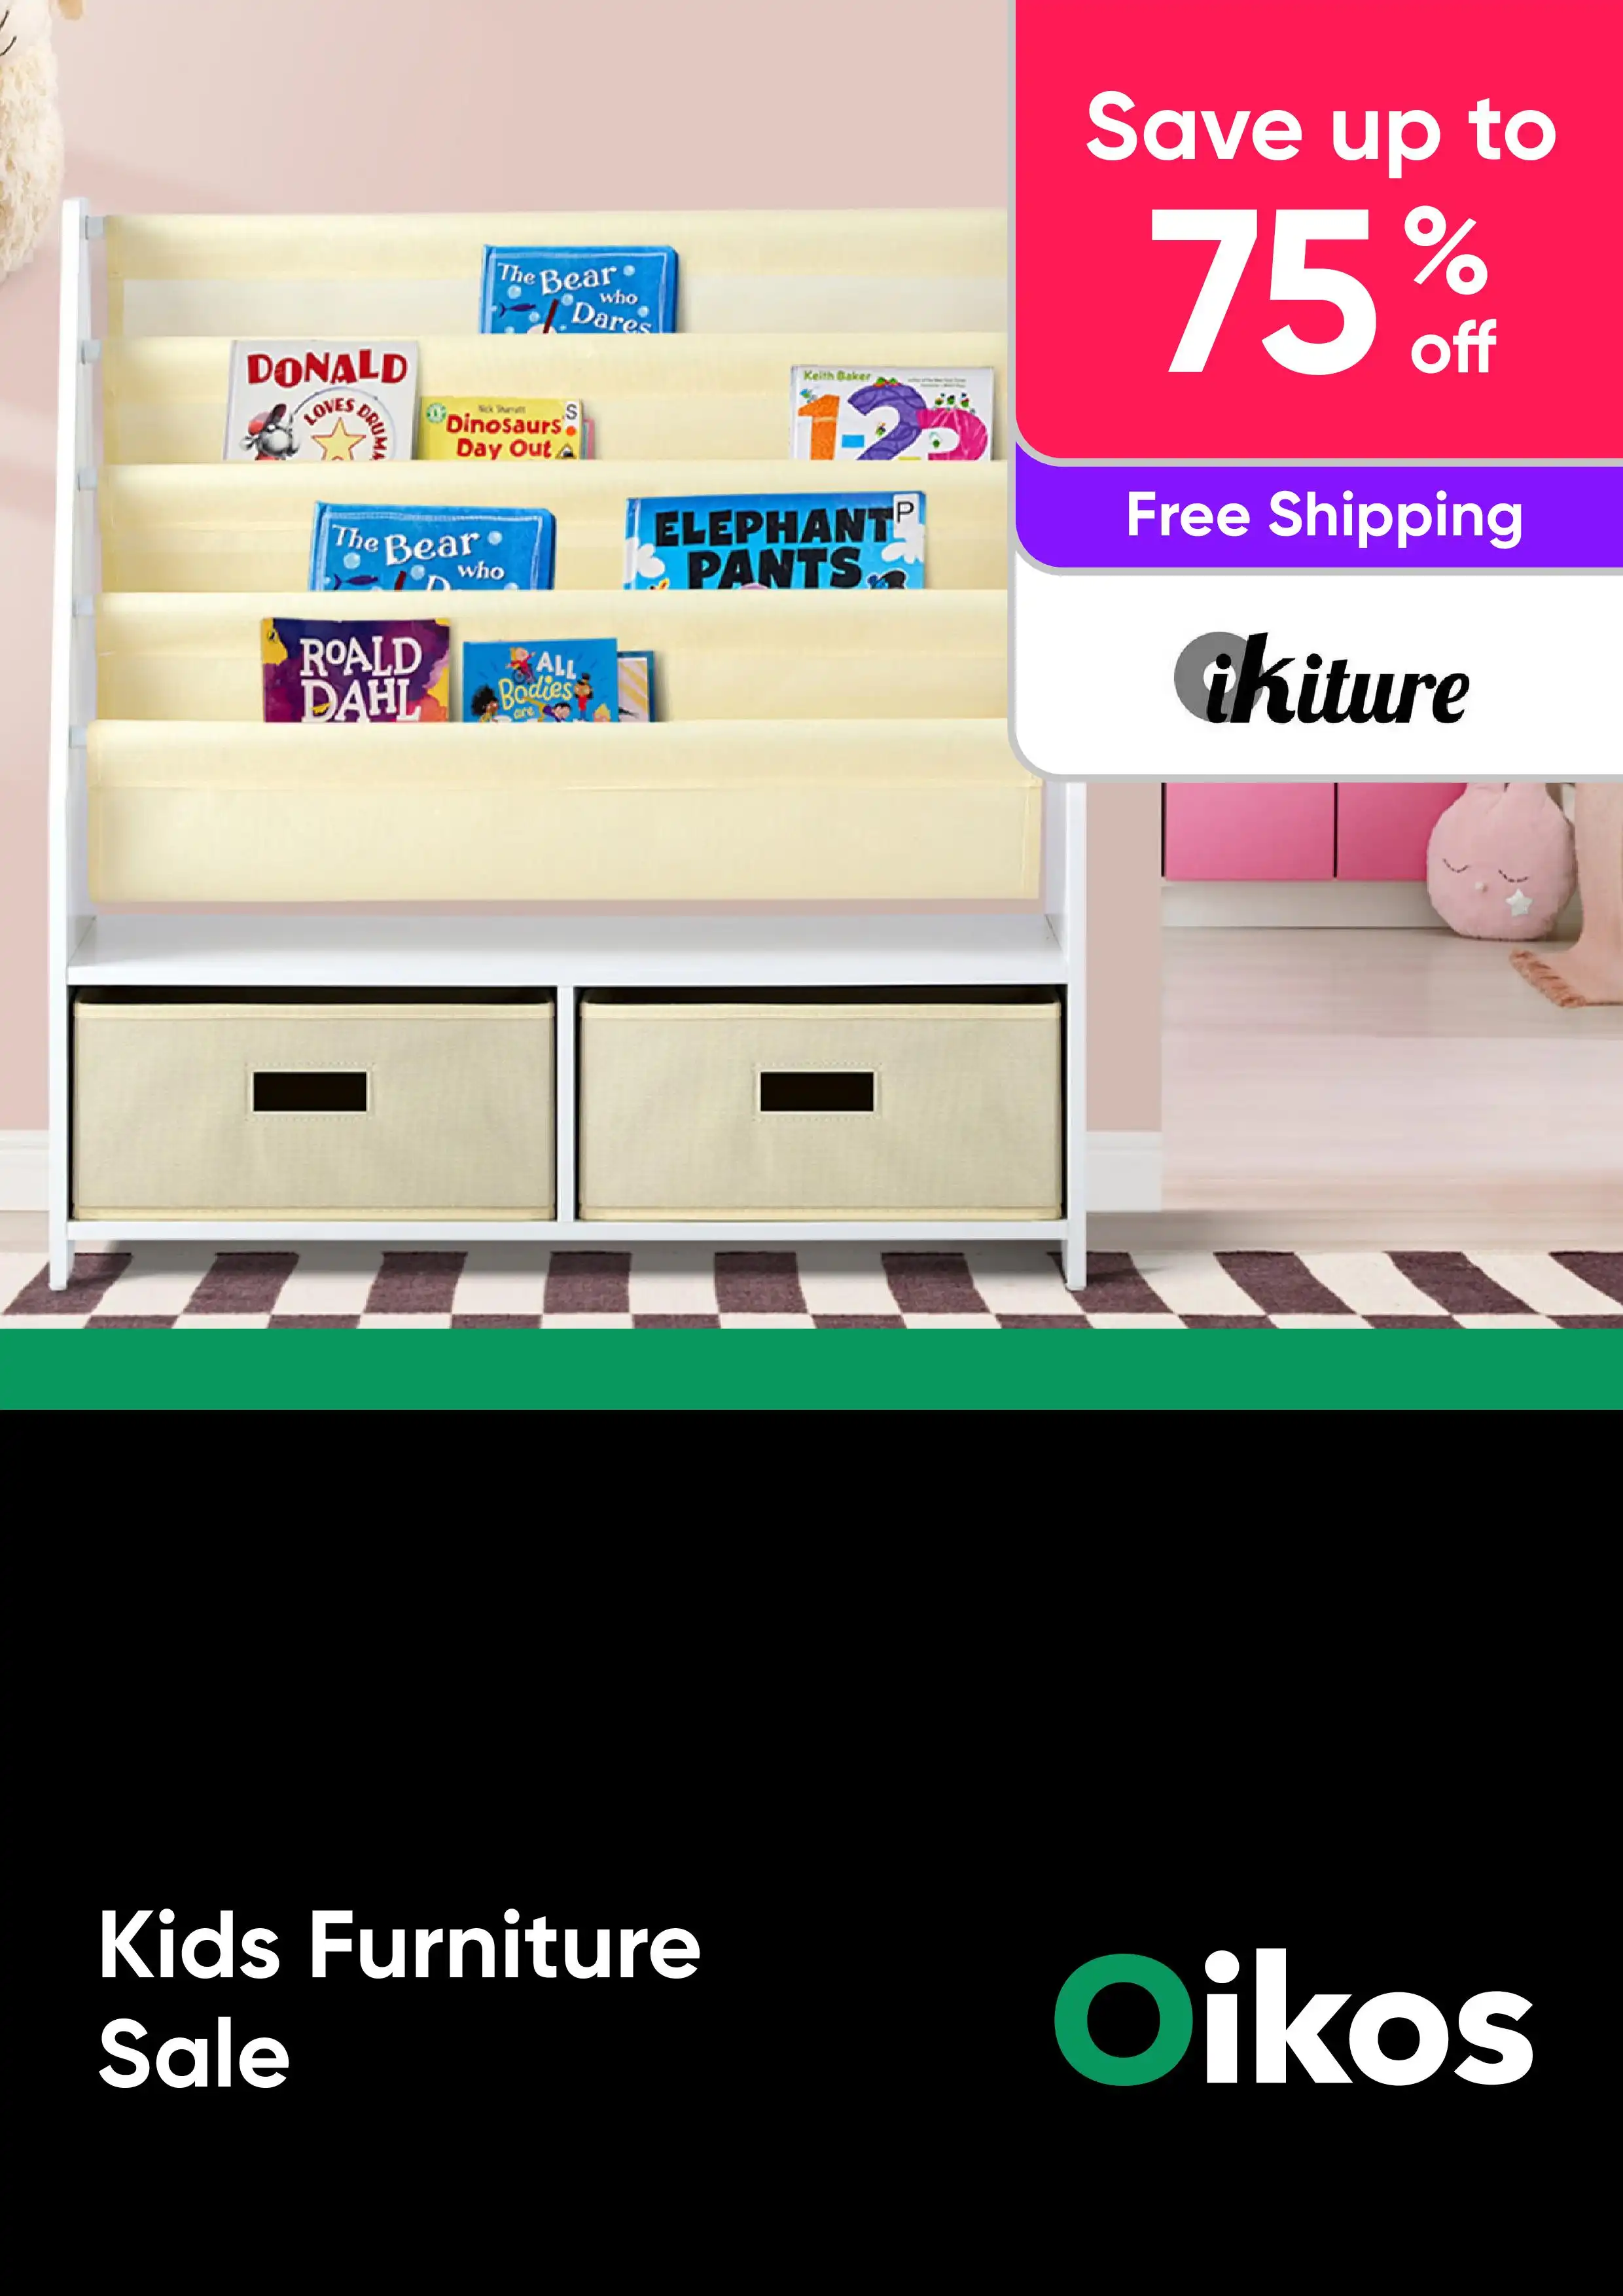 Kids Furniture Sale - Tables, Storage, Chairs and More - Oikiture - Up to 75% Off 